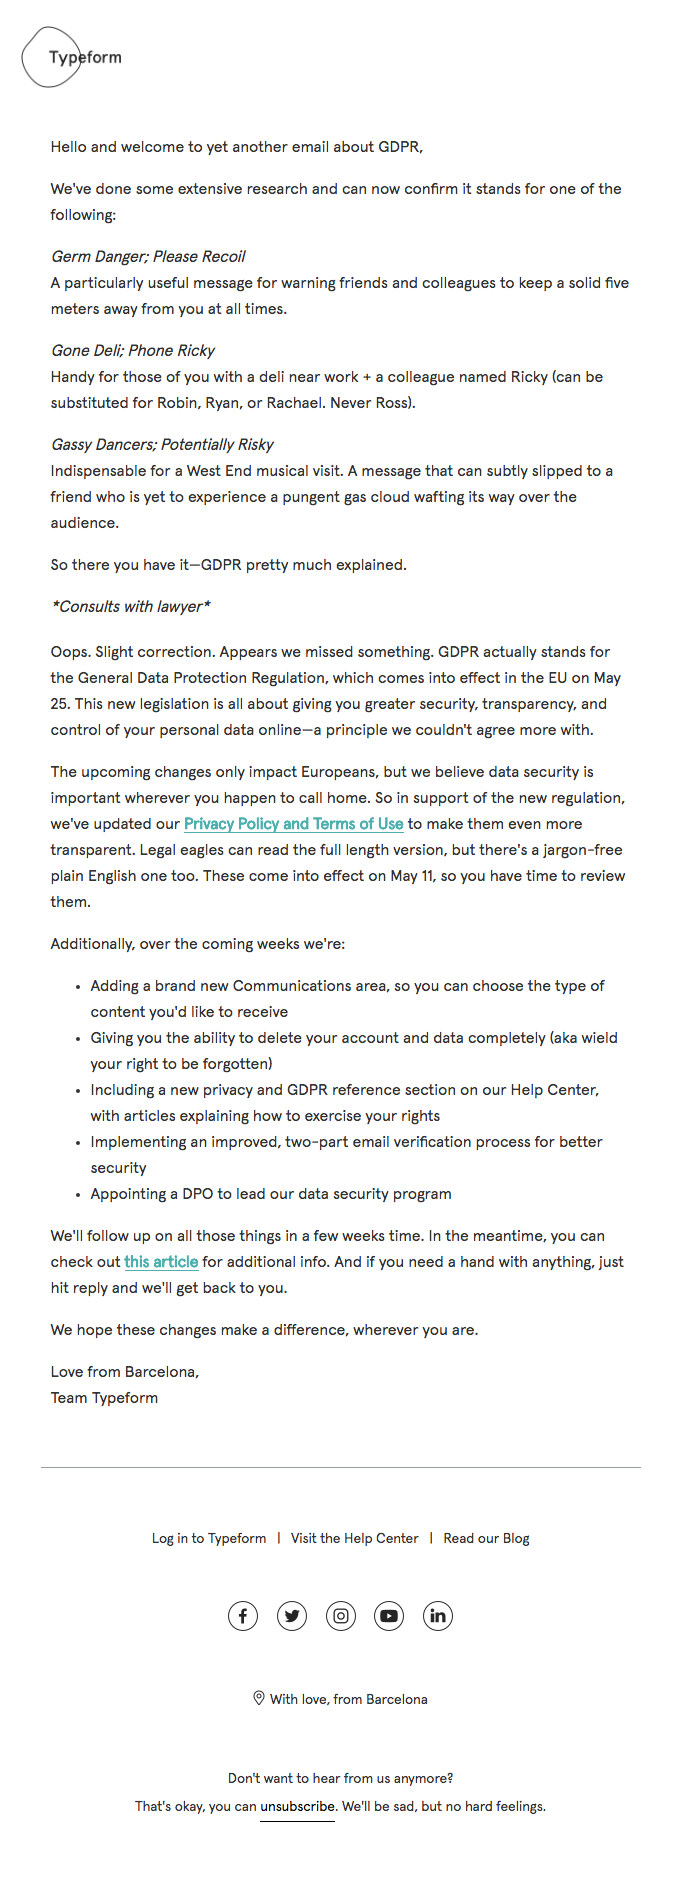 Updates to our Privacy Policy and your data - Typeform Email Newsletter